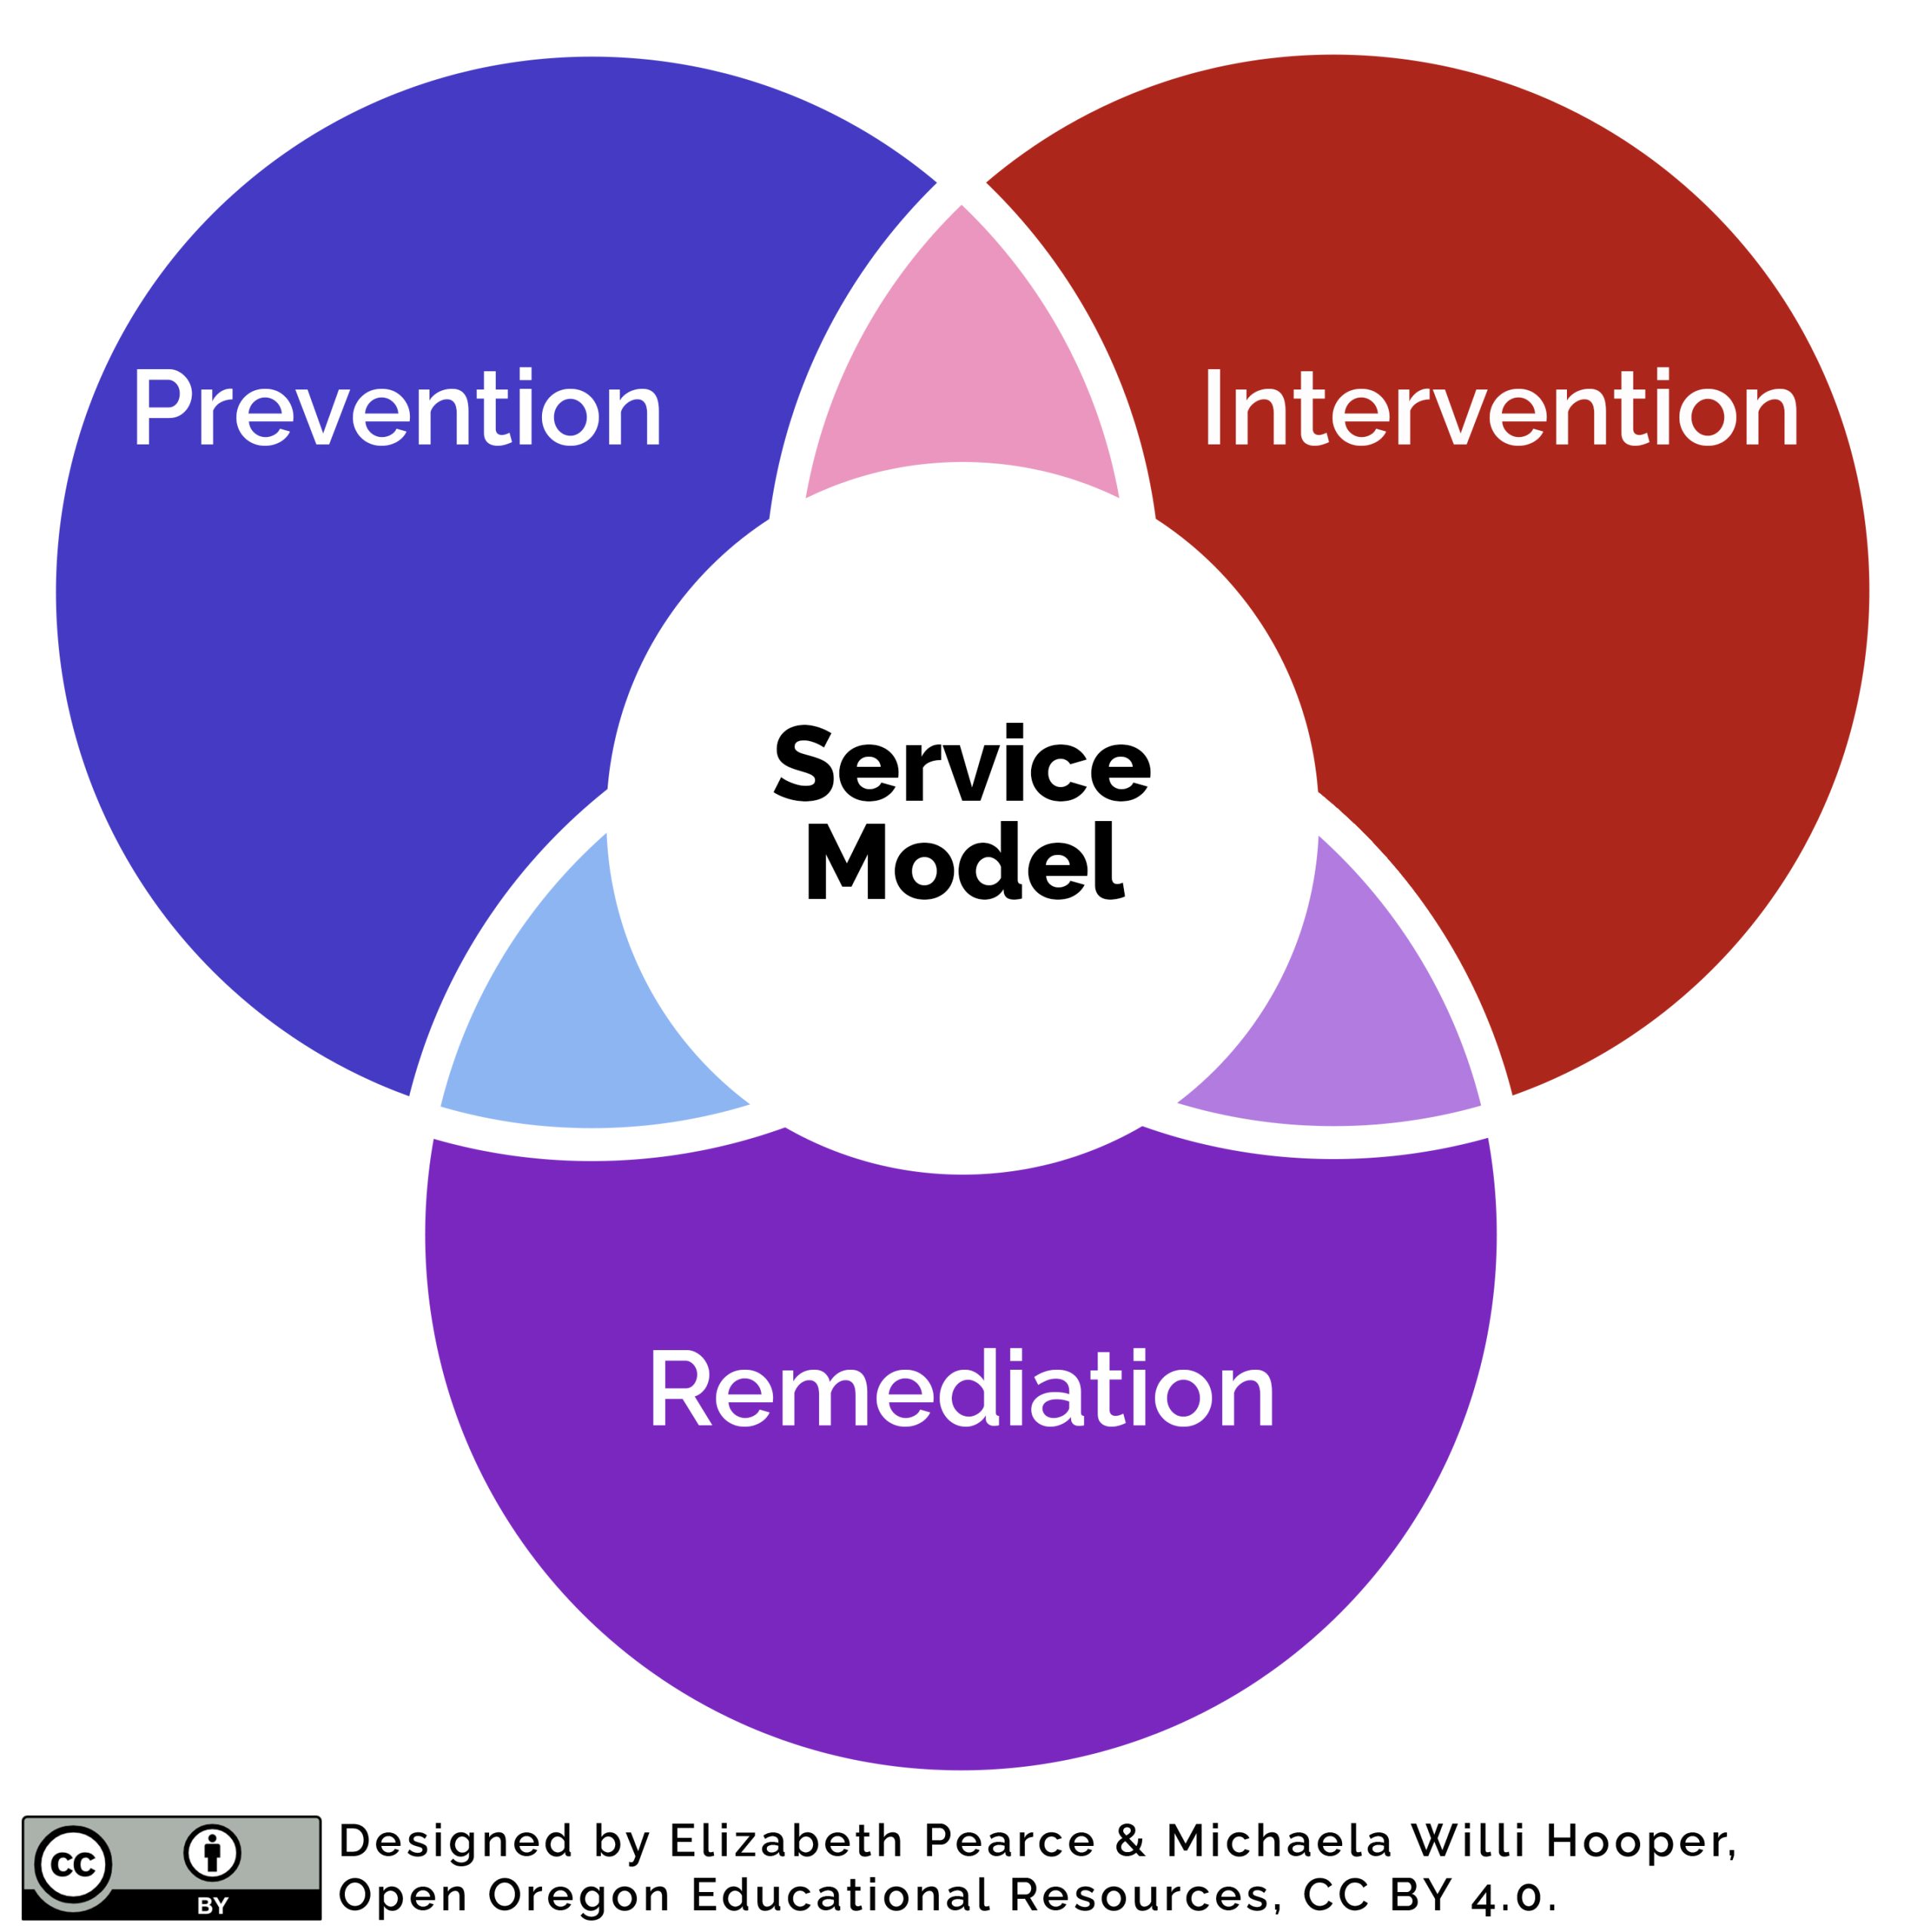 Three overlapping circles labeled Prevention, Intervention, and Remediation. The intersection is labeled Service Model.